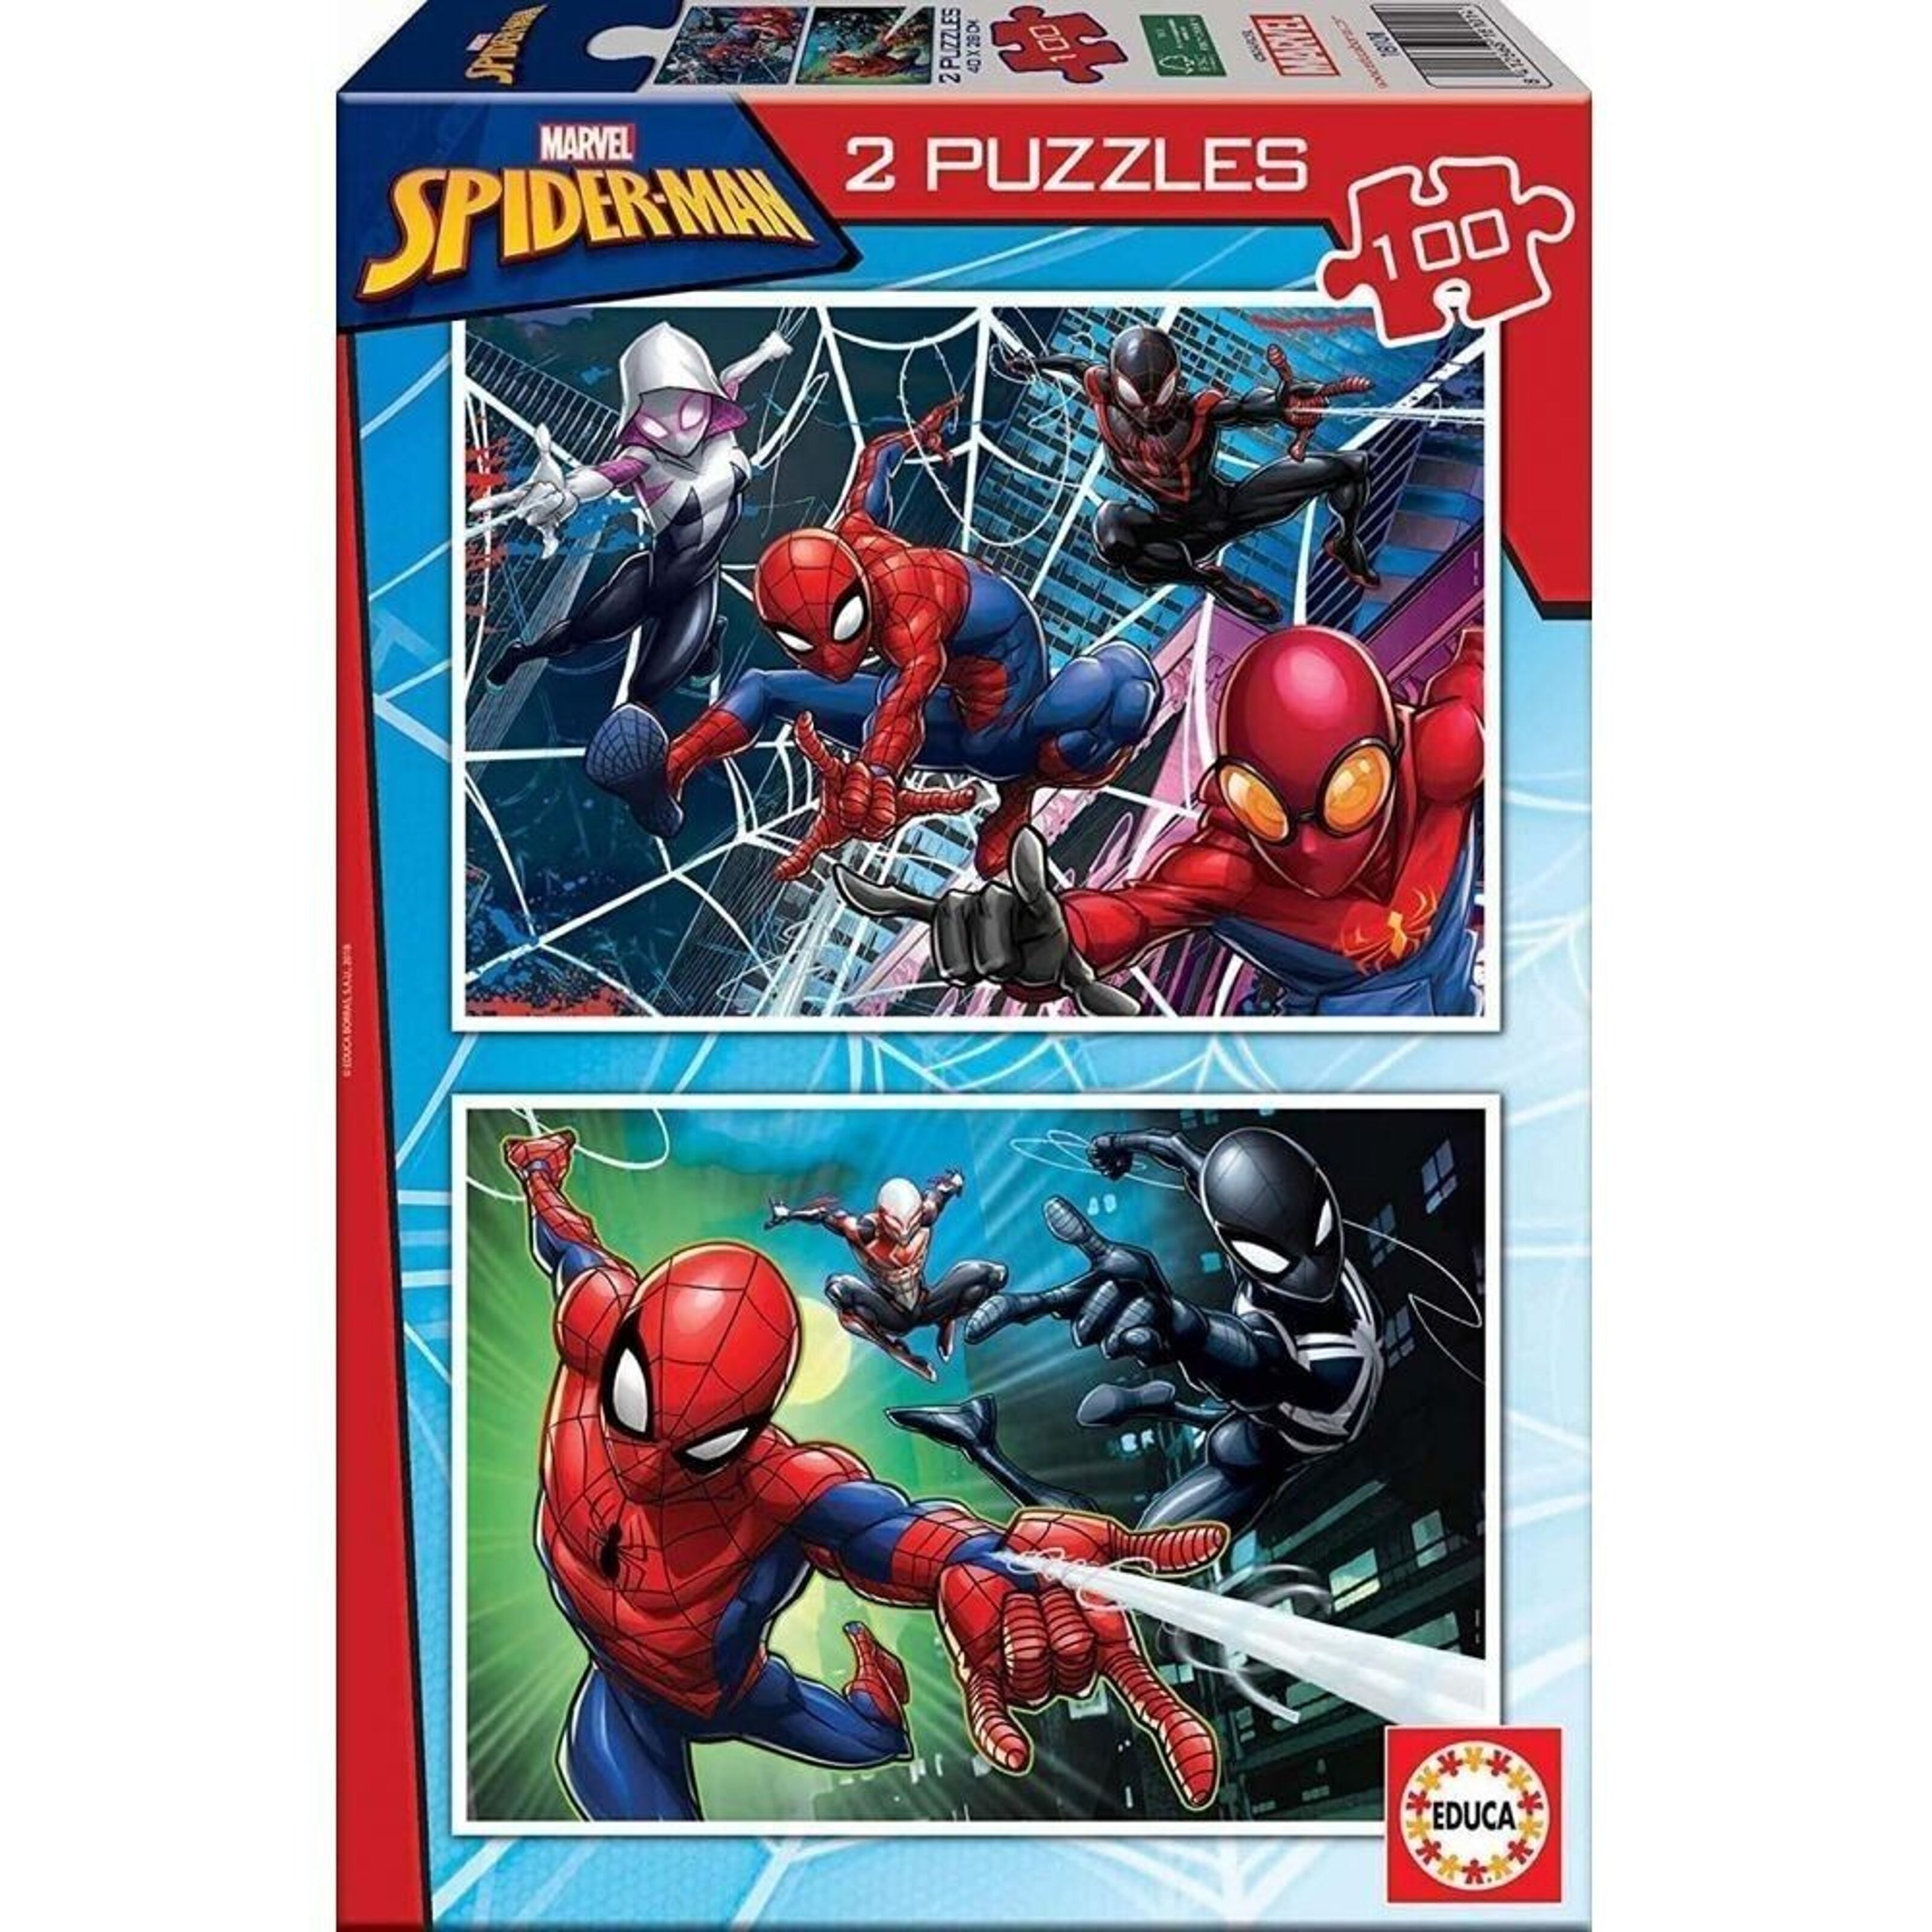 Spider-Man Puzzle Free Games, Activities, Puzzles